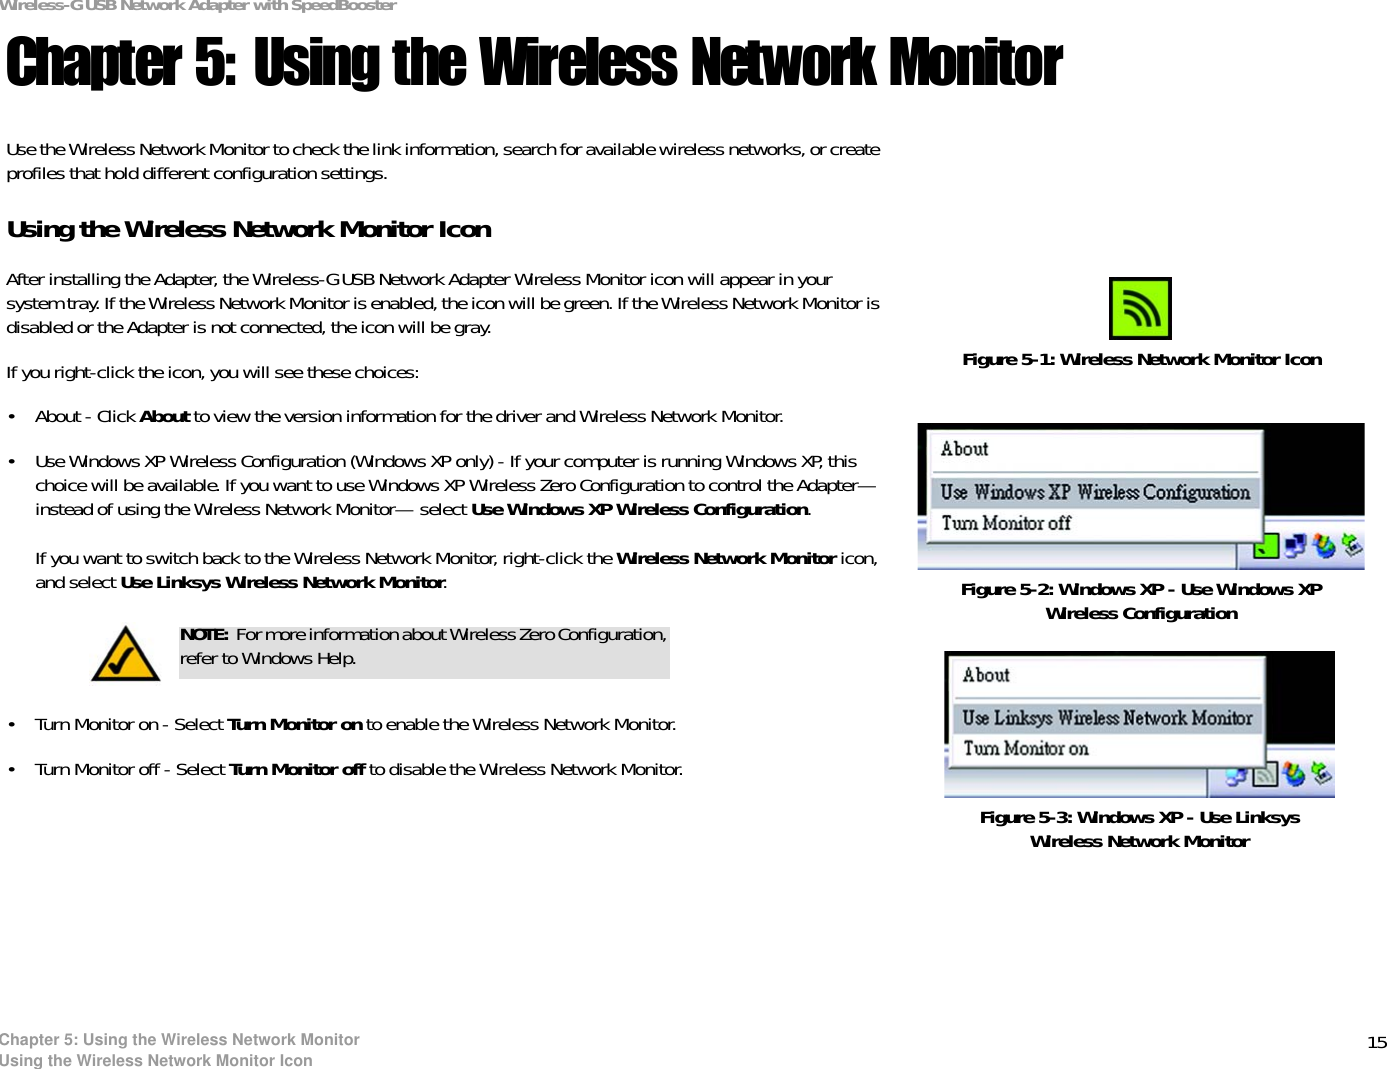 15Chapter 5: Using the Wireless Network MonitorUsing the Wireless Network Monitor IconWireless-G USB Network Adapter with SpeedBoosterChapter 5: Using the Wireless Network MonitorUse the Wireless Network Monitor to check the link information, search for available wireless networks, or create profiles that hold different configuration settings.Using the Wireless Network Monitor IconAfter installing the Adapter, the Wireless-G USB Network Adapter Wireless Monitor icon will appear in your system tray. If the Wireless Network Monitor is enabled, the icon will be green. If the Wireless Network Monitor is disabled or the Adapter is not connected, the icon will be gray.If you right-click the icon, you will see these choices:• About - Click About to view the version information for the driver and Wireless Network Monitor.• Use Windows XP Wireless Configuration (Windows XP only) - If your computer is running Windows XP, this choice will be available. If you want to use Windows XP Wireless Zero Configuration to control the Adapter—instead of using the Wireless Network Monitor— select Use Windows XP Wireless Configuration.If you want to switch back to the Wireless Network Monitor, right-click the Wireless Network Monitor icon, and select Use Linksys Wireless Network Monitor.• Turn Monitor on - Select Turn Monitor on to enable the Wireless Network Monitor.• Turn Monitor off - Select Turn Monitor off to disable the Wireless Network Monitor.Figure 5-1: Wireless Network Monitor IconNOTE: For more information about Wireless Zero Configuration, refer to Windows Help.Figure 5-2: Windows XP - Use Windows XP Wireless ConfigurationFigure 5-3: Windows XP - Use Linksys Wireless Network Monitor